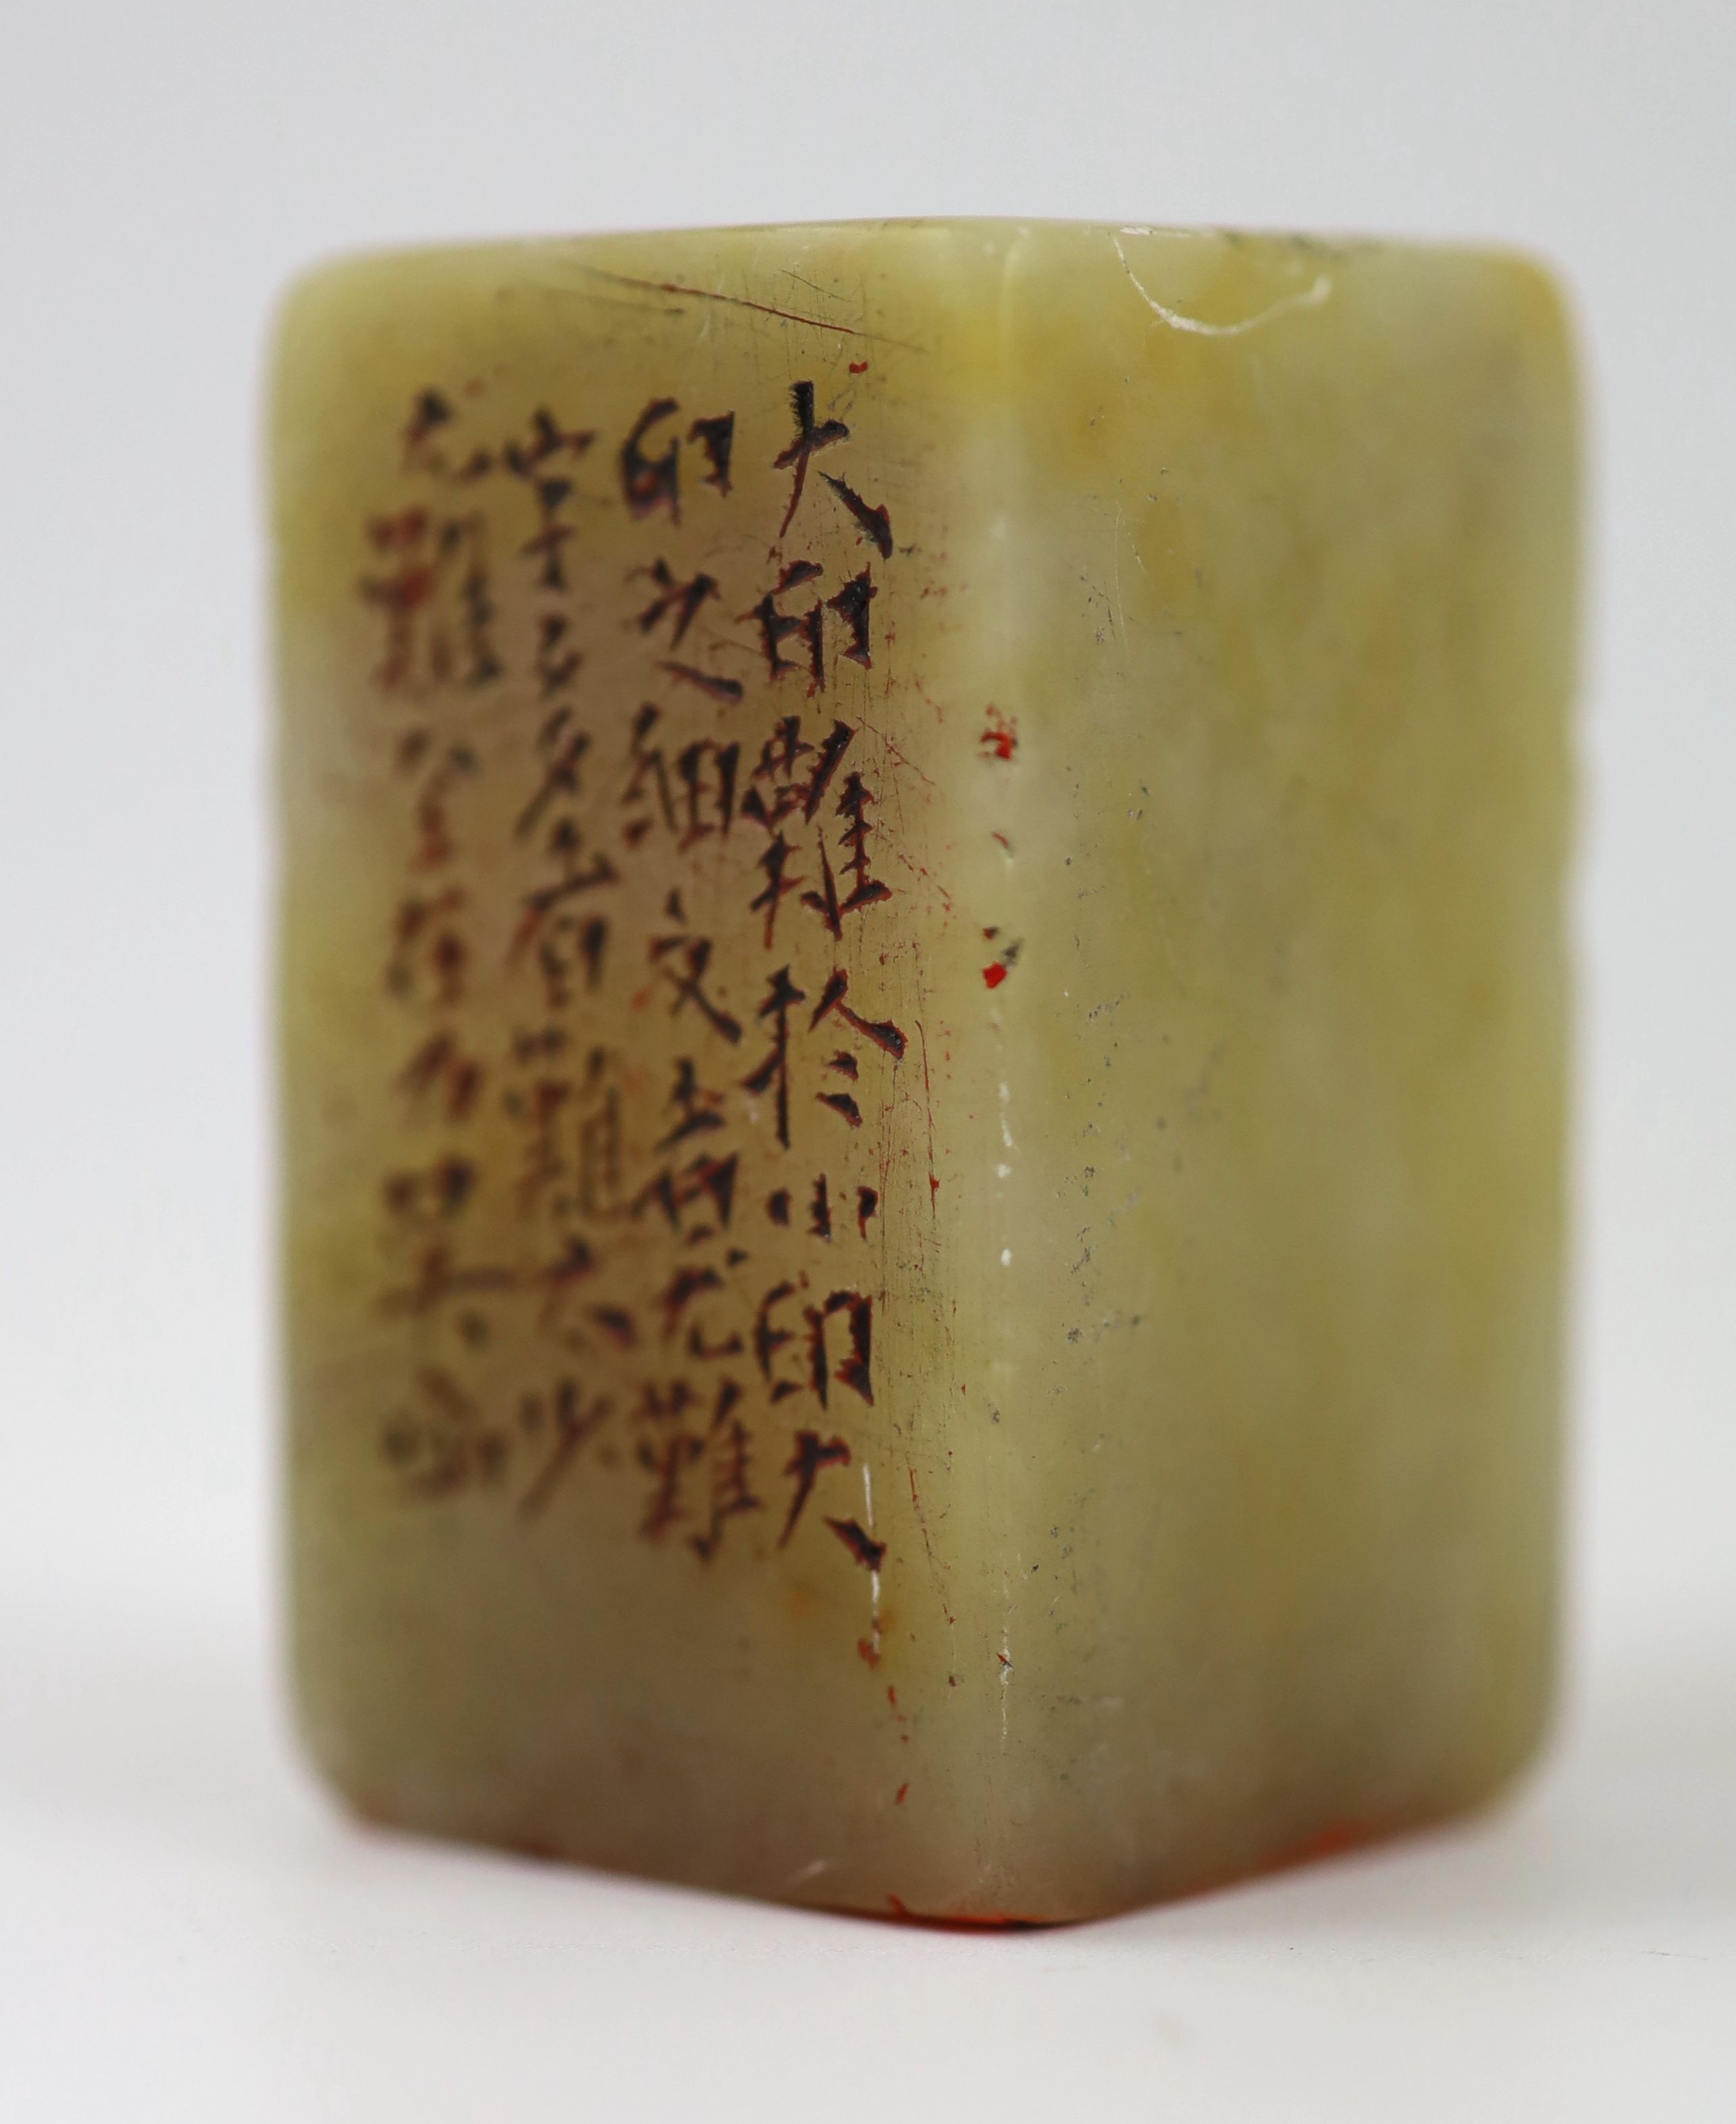 A Chinese cream and russet soapstone square seal, 5.2 cm high